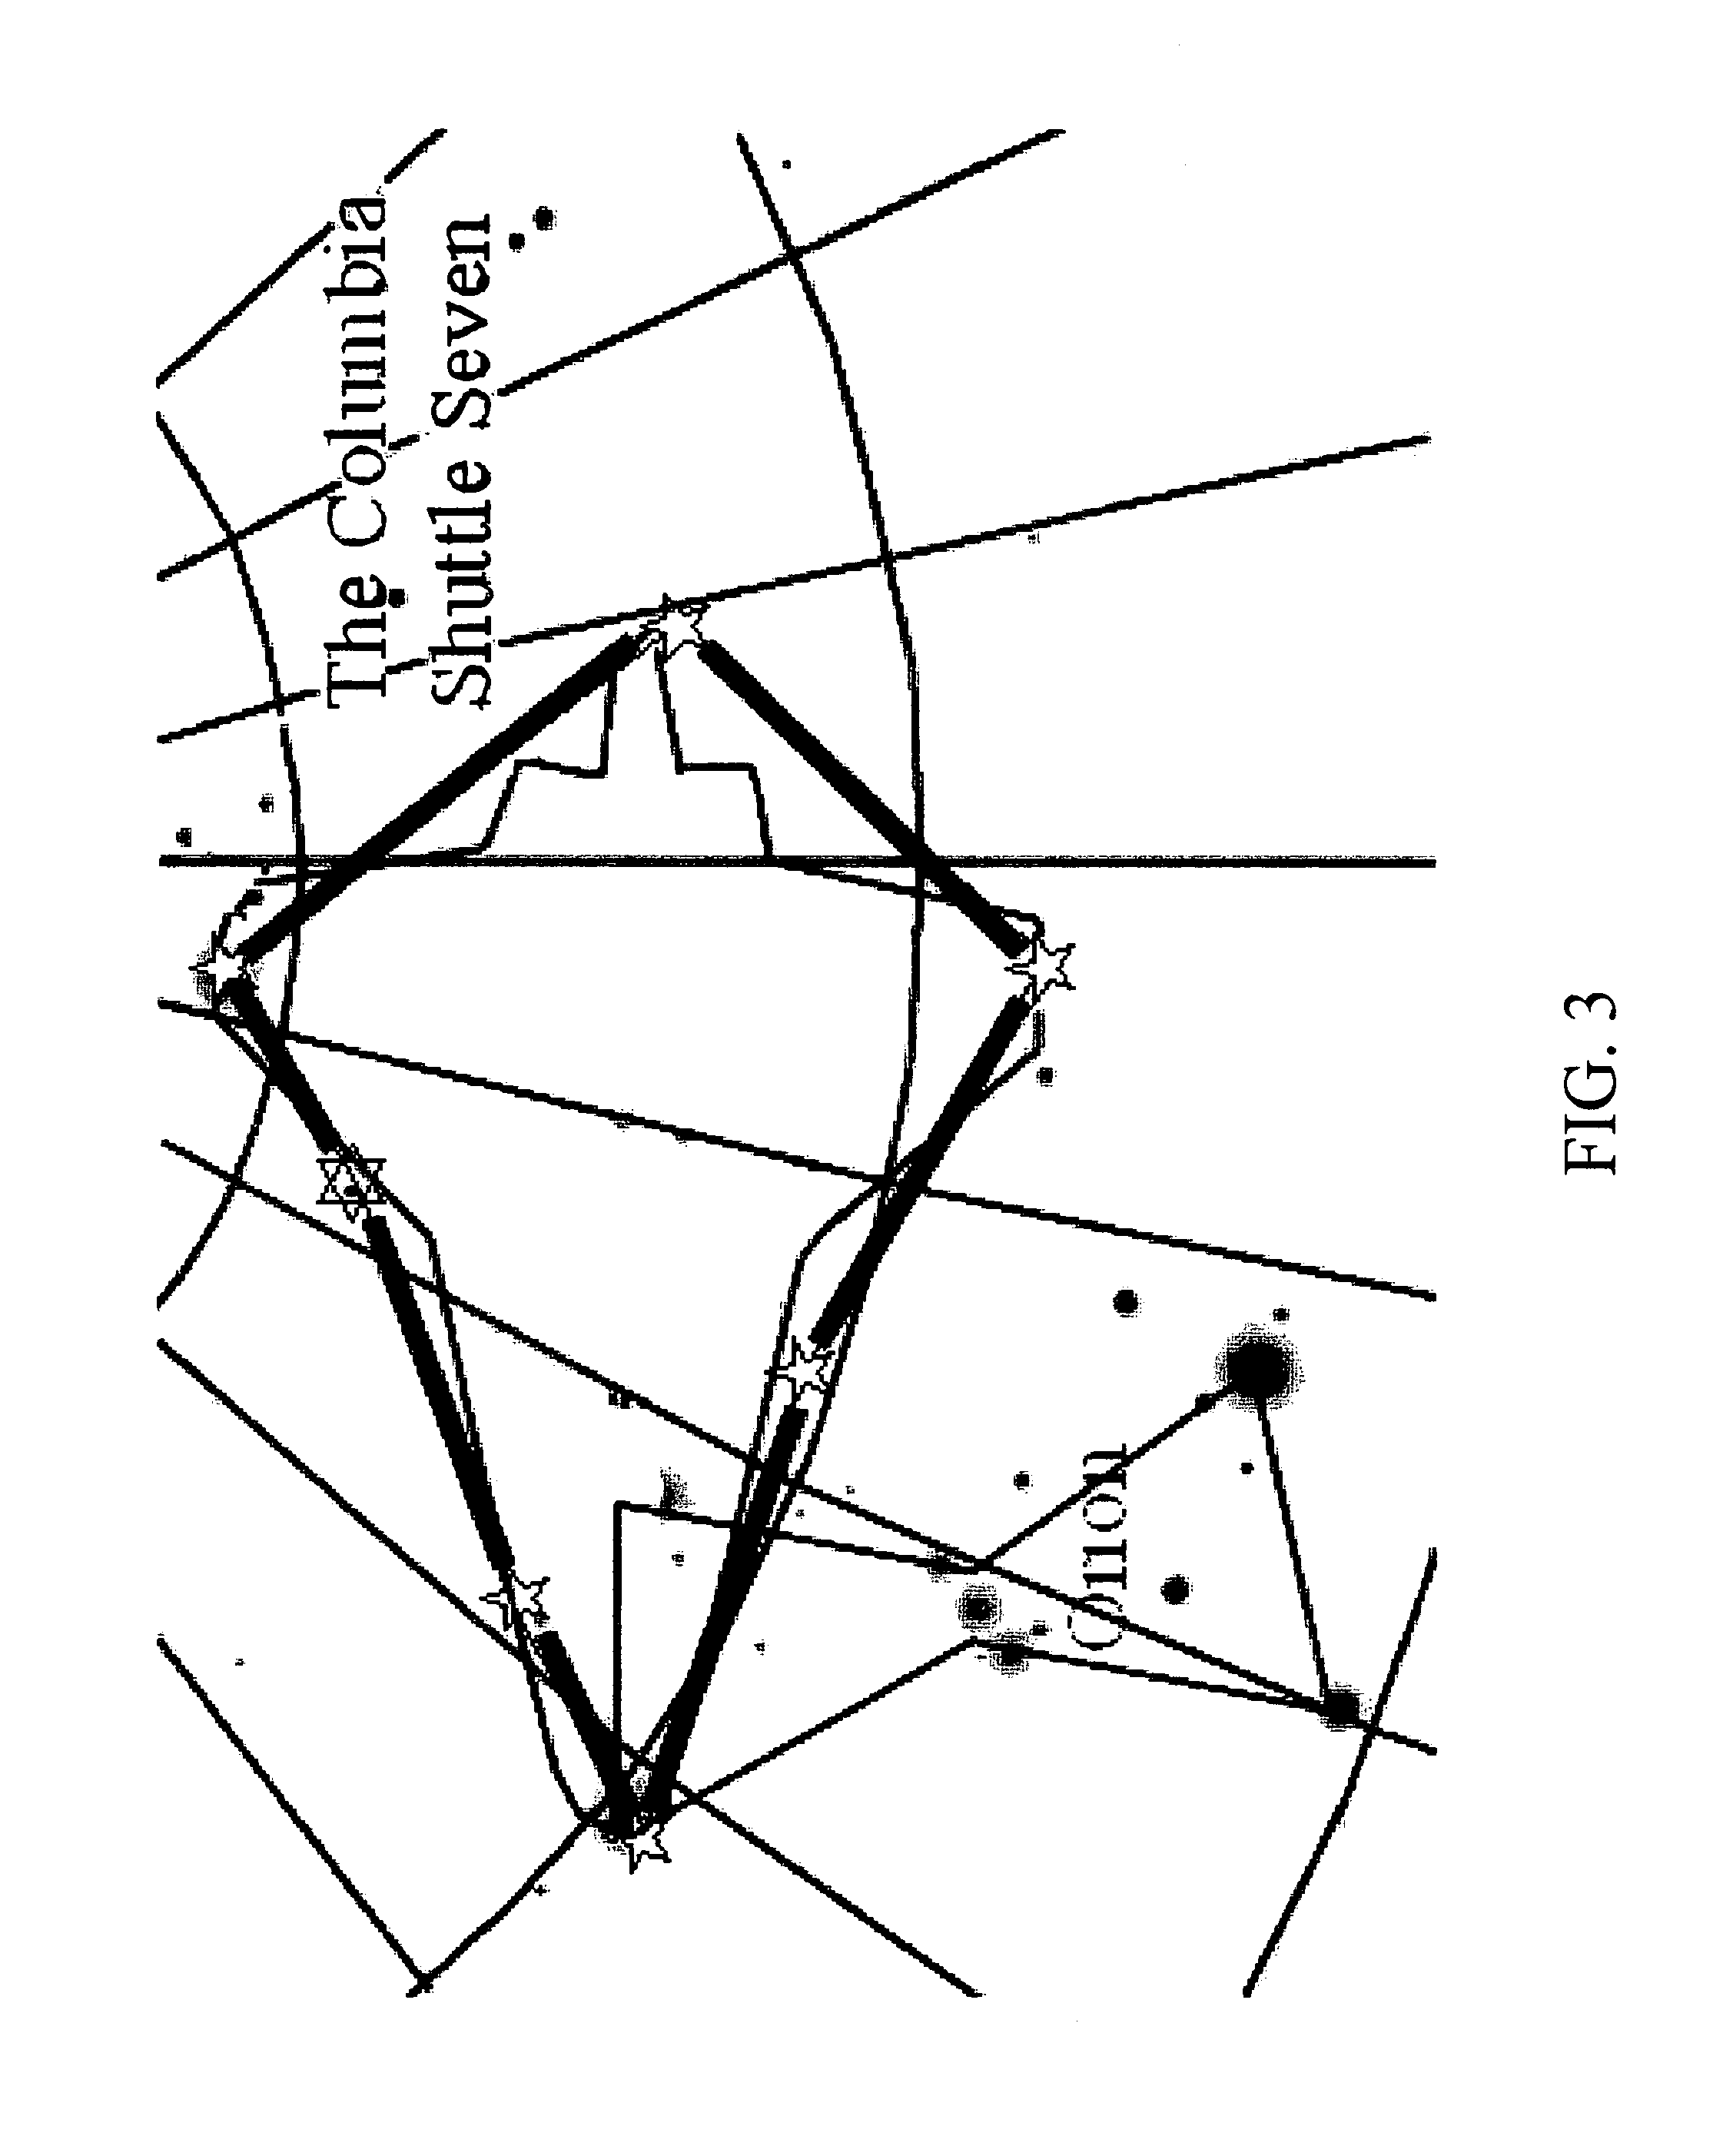 Methods for identifying and registering constellations